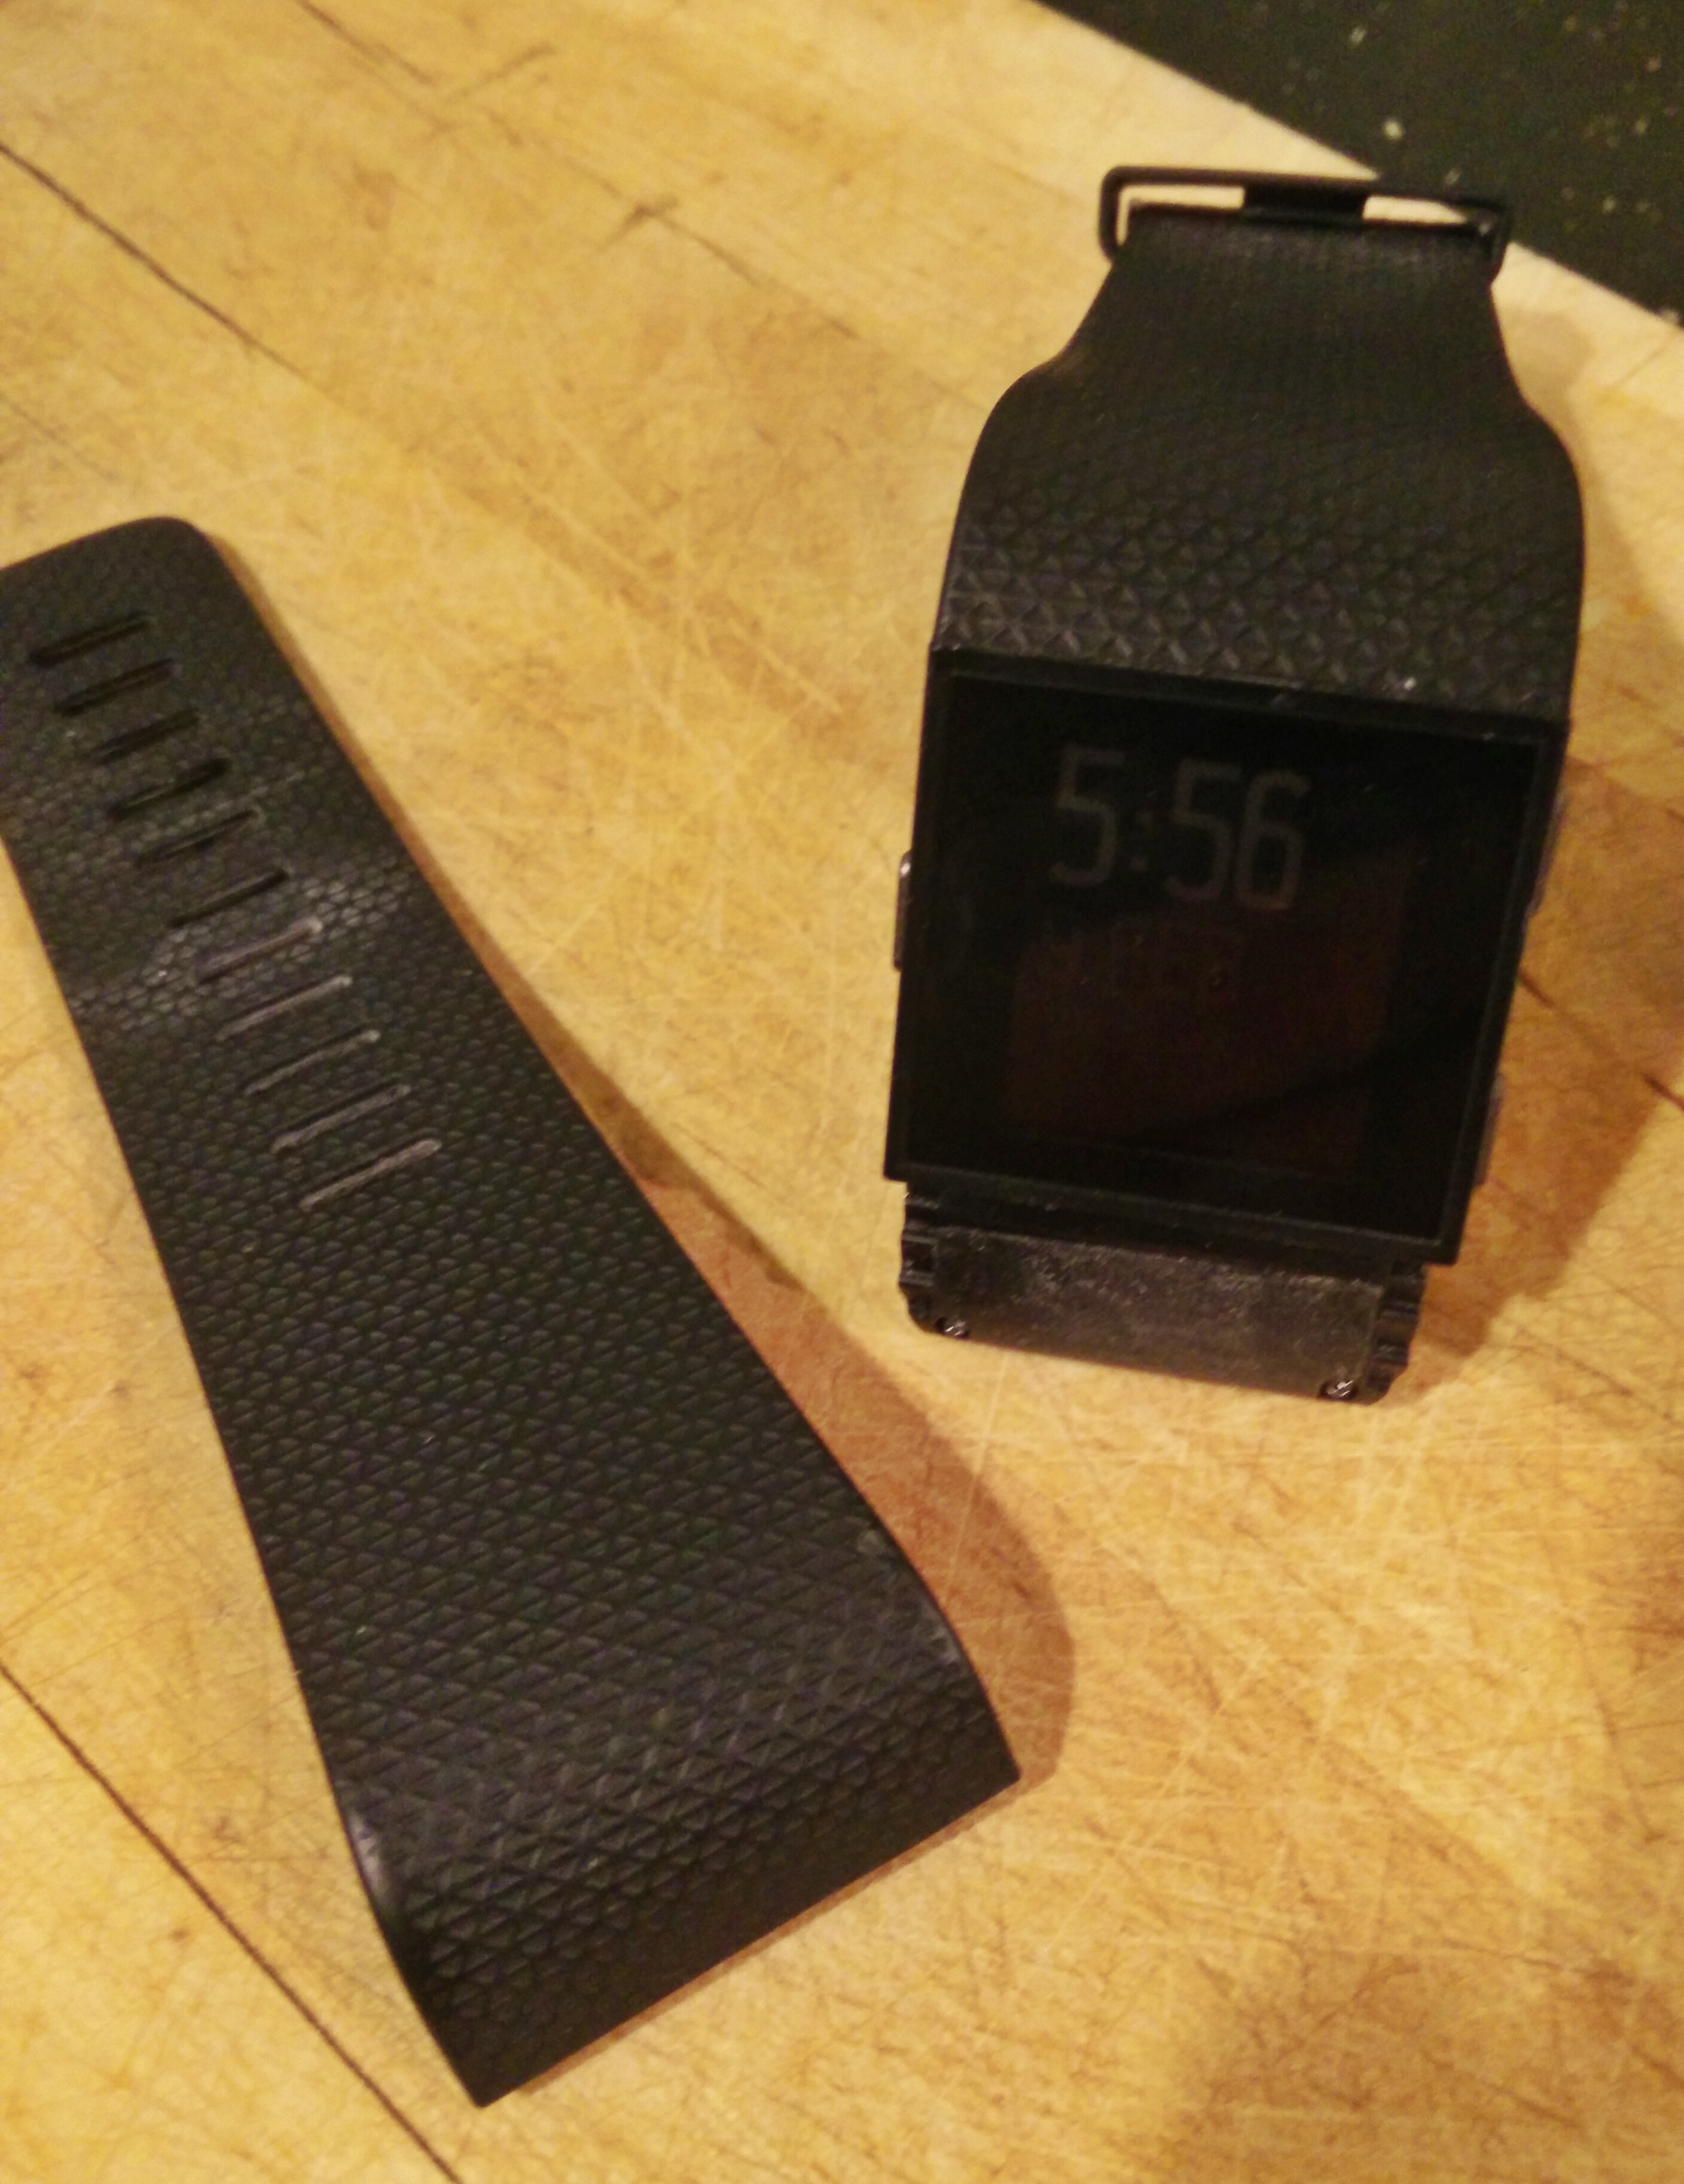 Goodbye Fitbit surge.. Our time was 